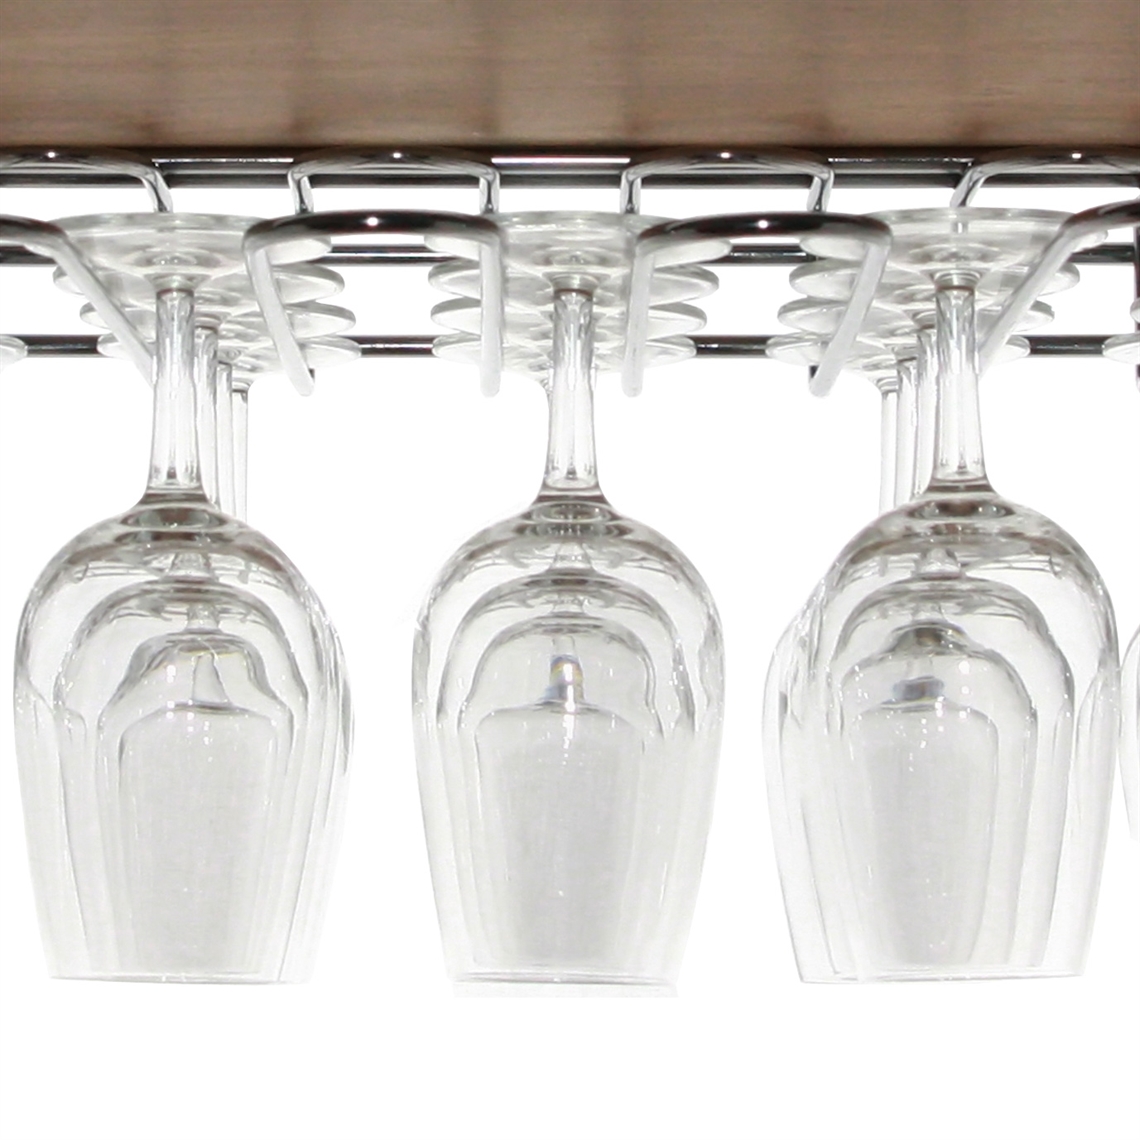 View more glass washer racks / trays from our Wine Glass Hanging Racks range